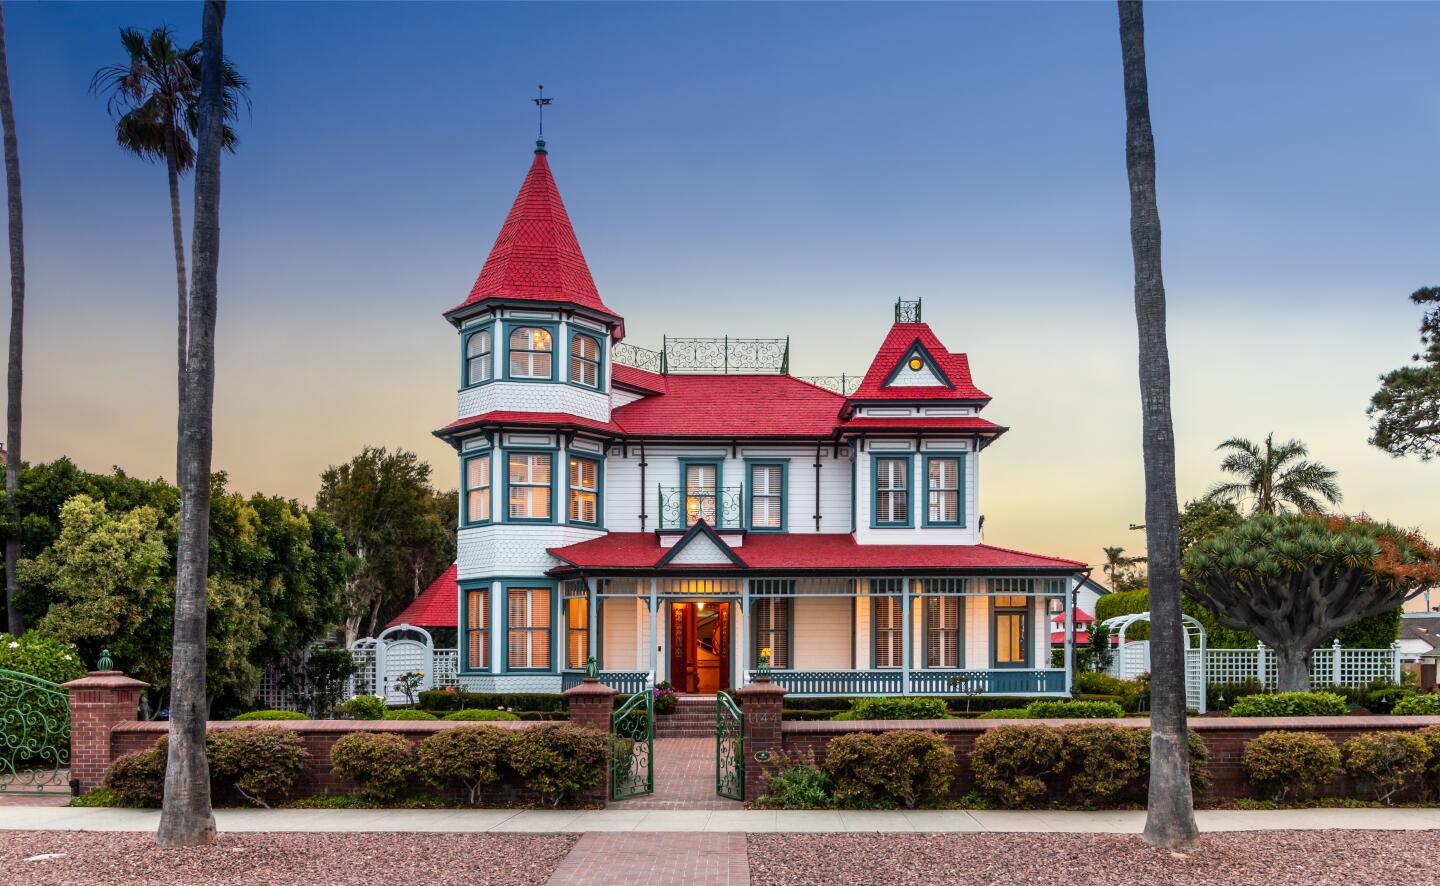 The four-story Victorian.